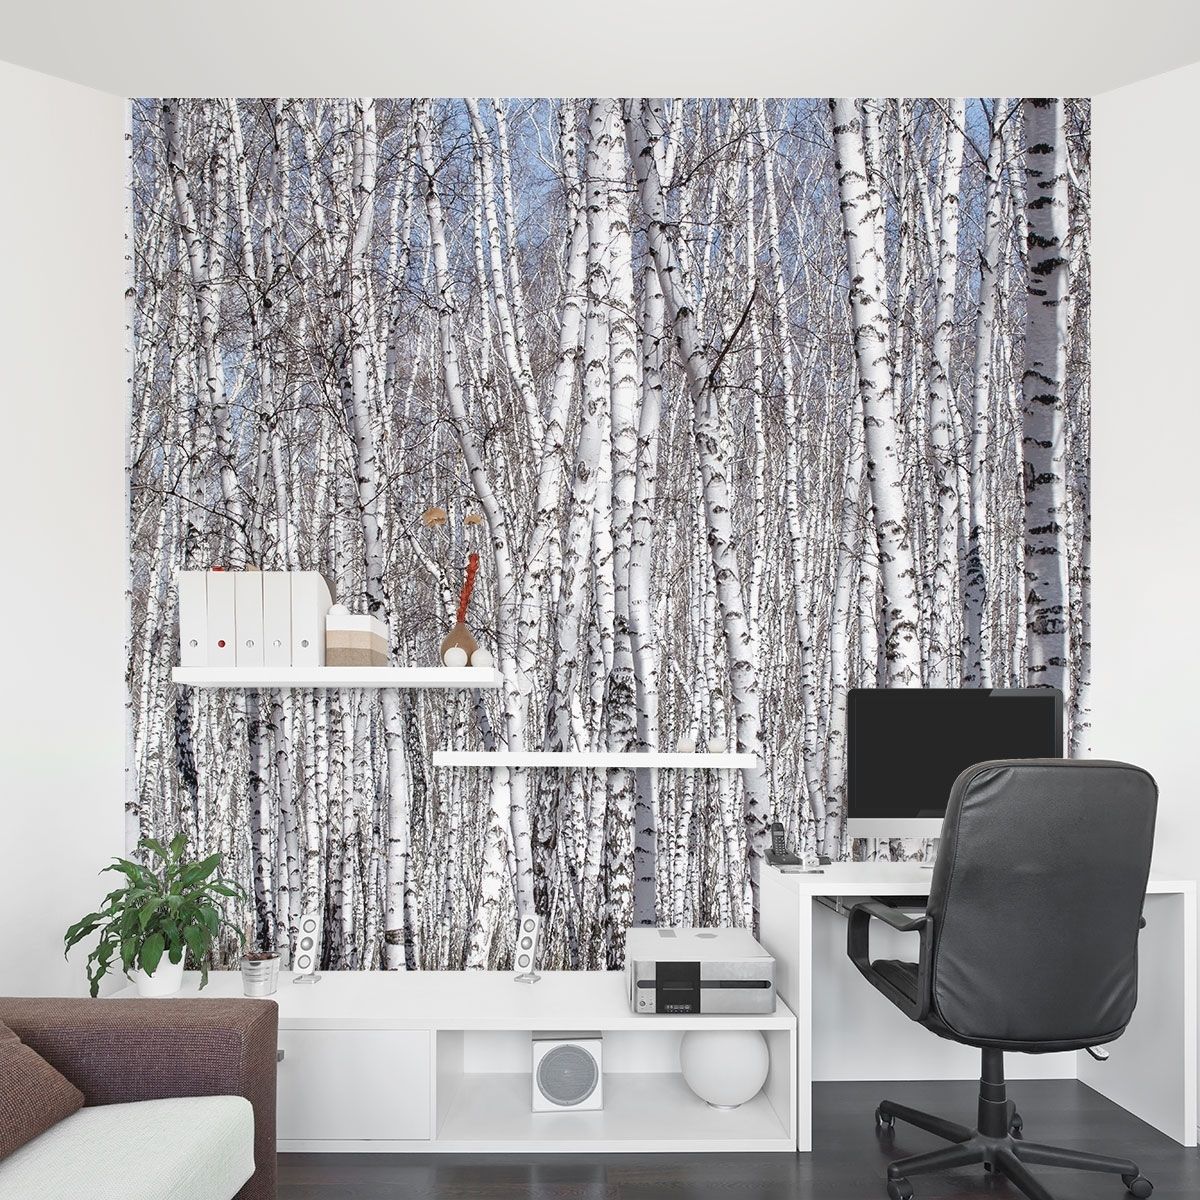 Birch Trees Wall Mural Pertaining To Recent Murals Wall Accents (View 1 of 15)